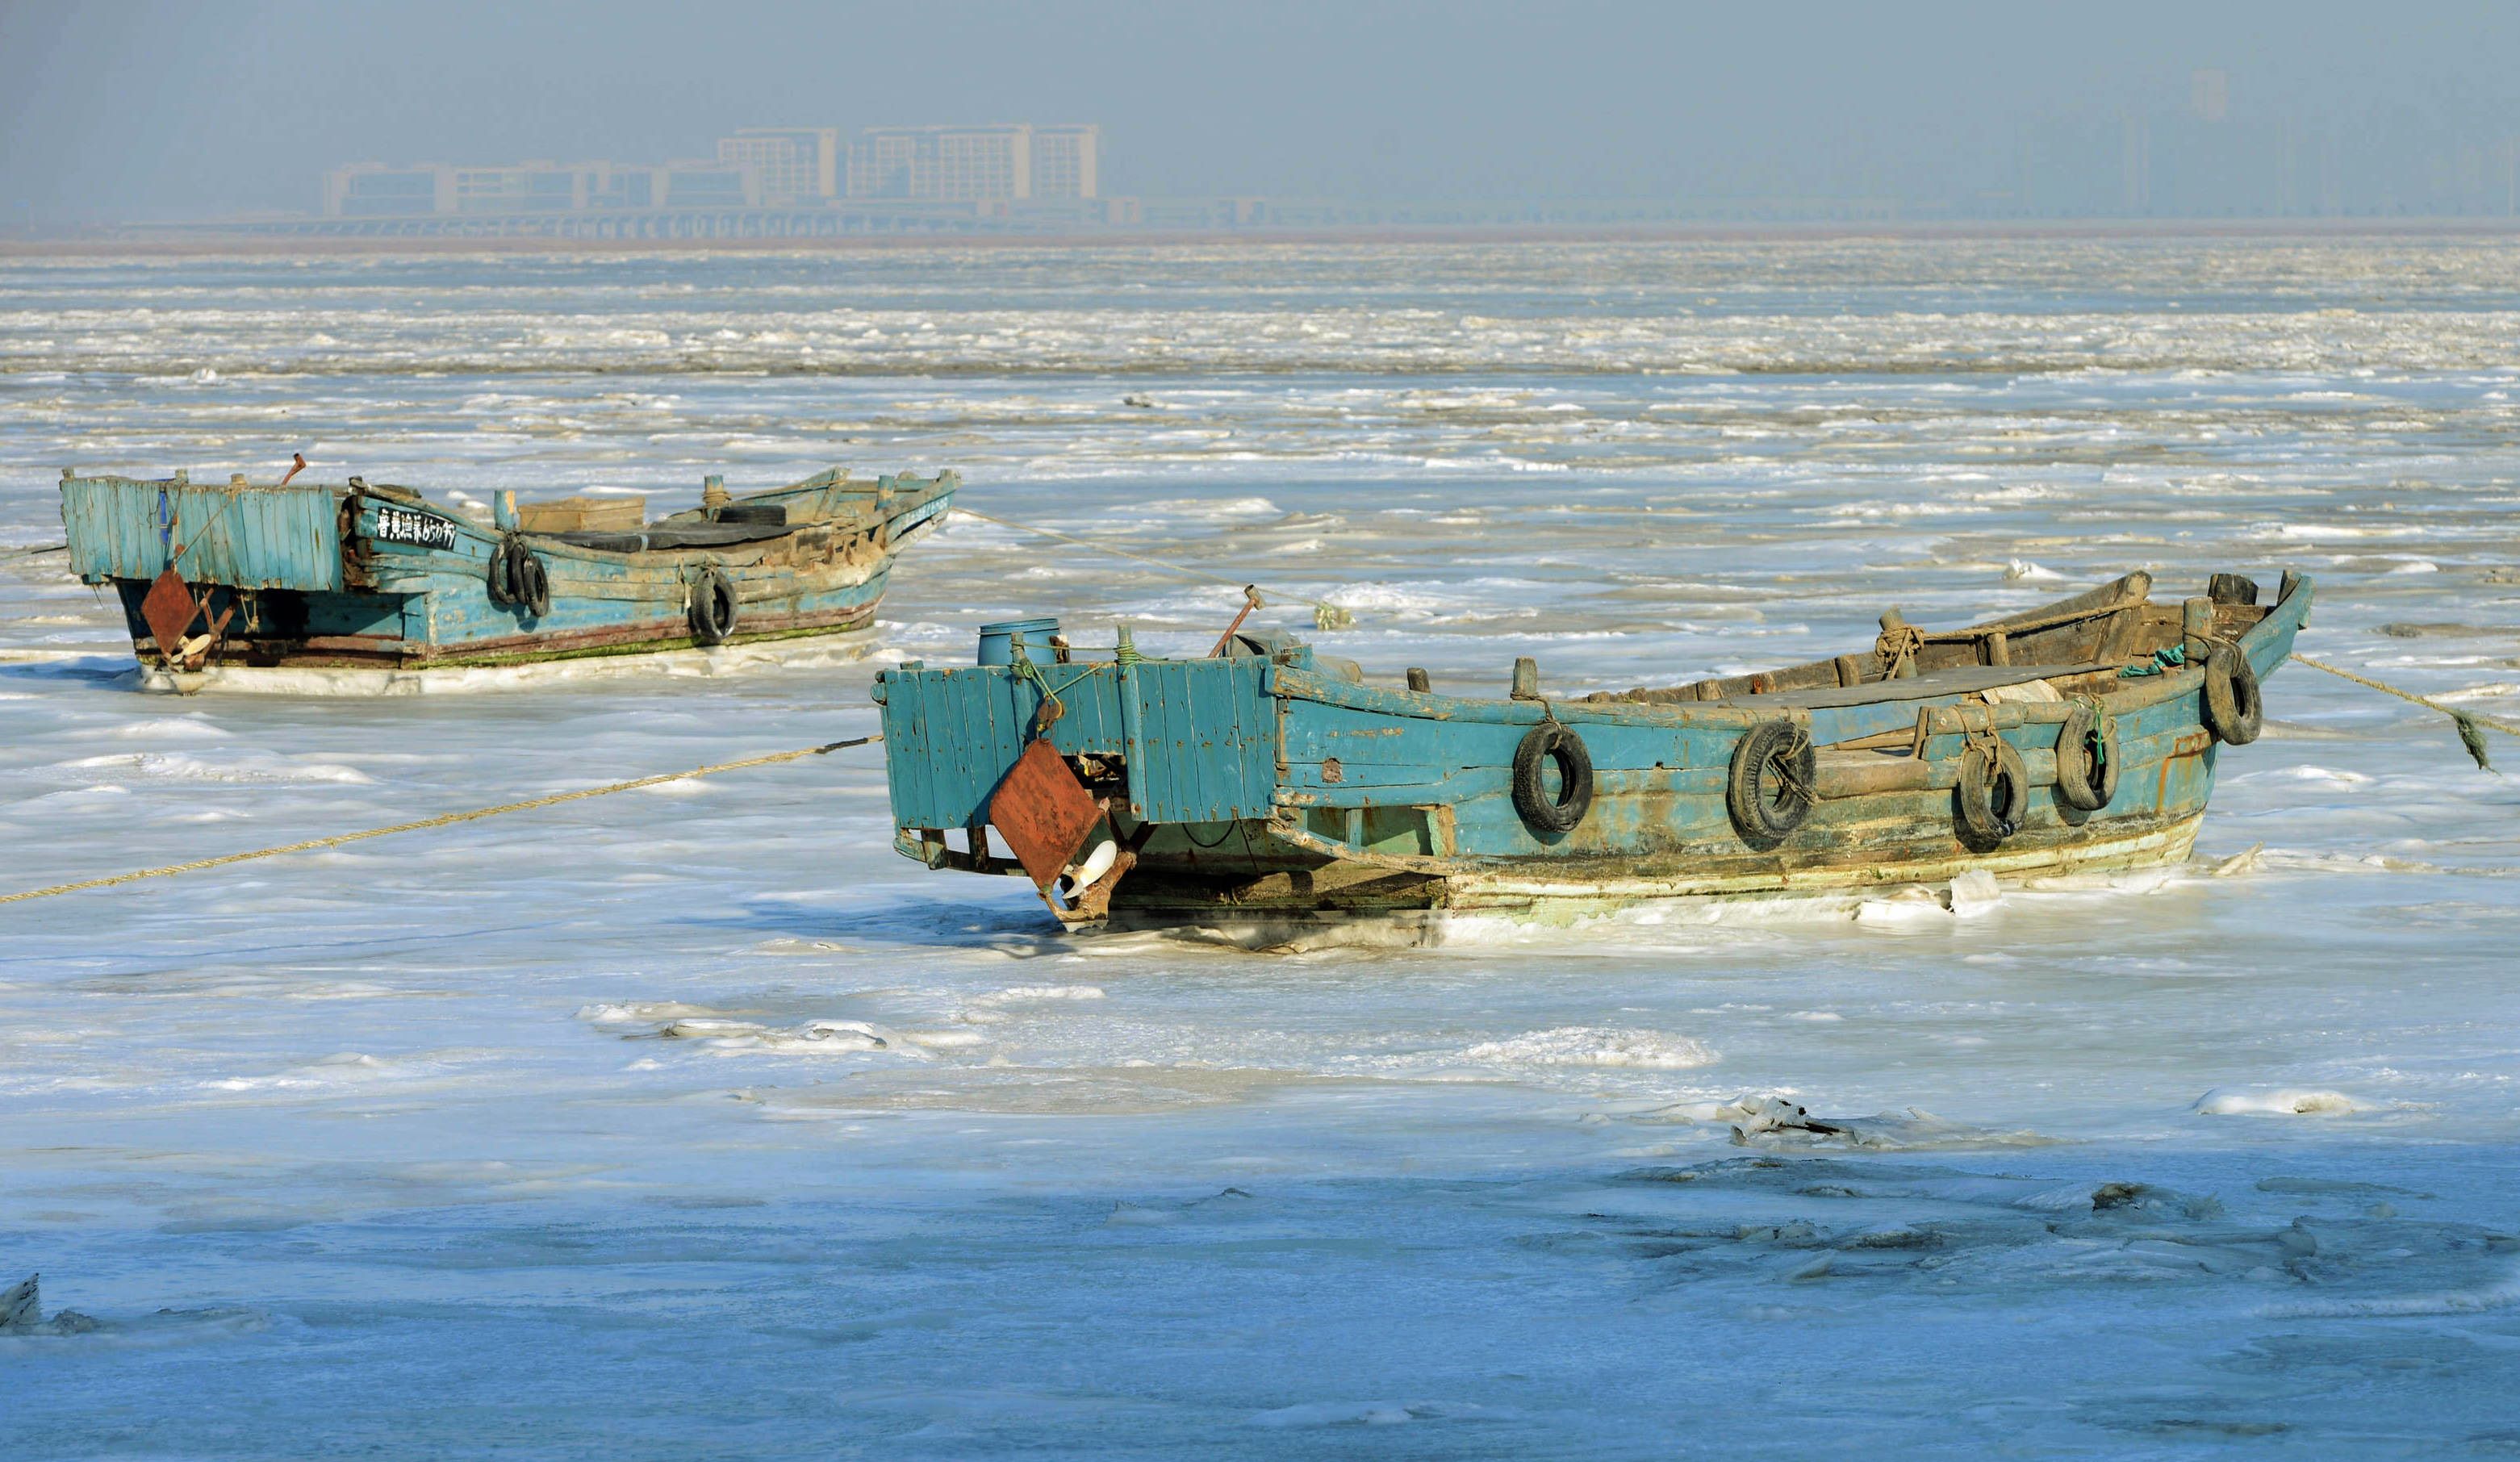 Fishing boats sit stuck in the ice of the frozen coastal waters of Jiaozhou Bay in Qingdao in eastern China's Shandong province on January 25, 2016. Snow, sleet and icy winds across Asia caused deaths, flight cancellations and chaos over the weekend as areas used to basking in balmier climates struggled with record-low temperatures. CHINA OUT AFP PHOTO